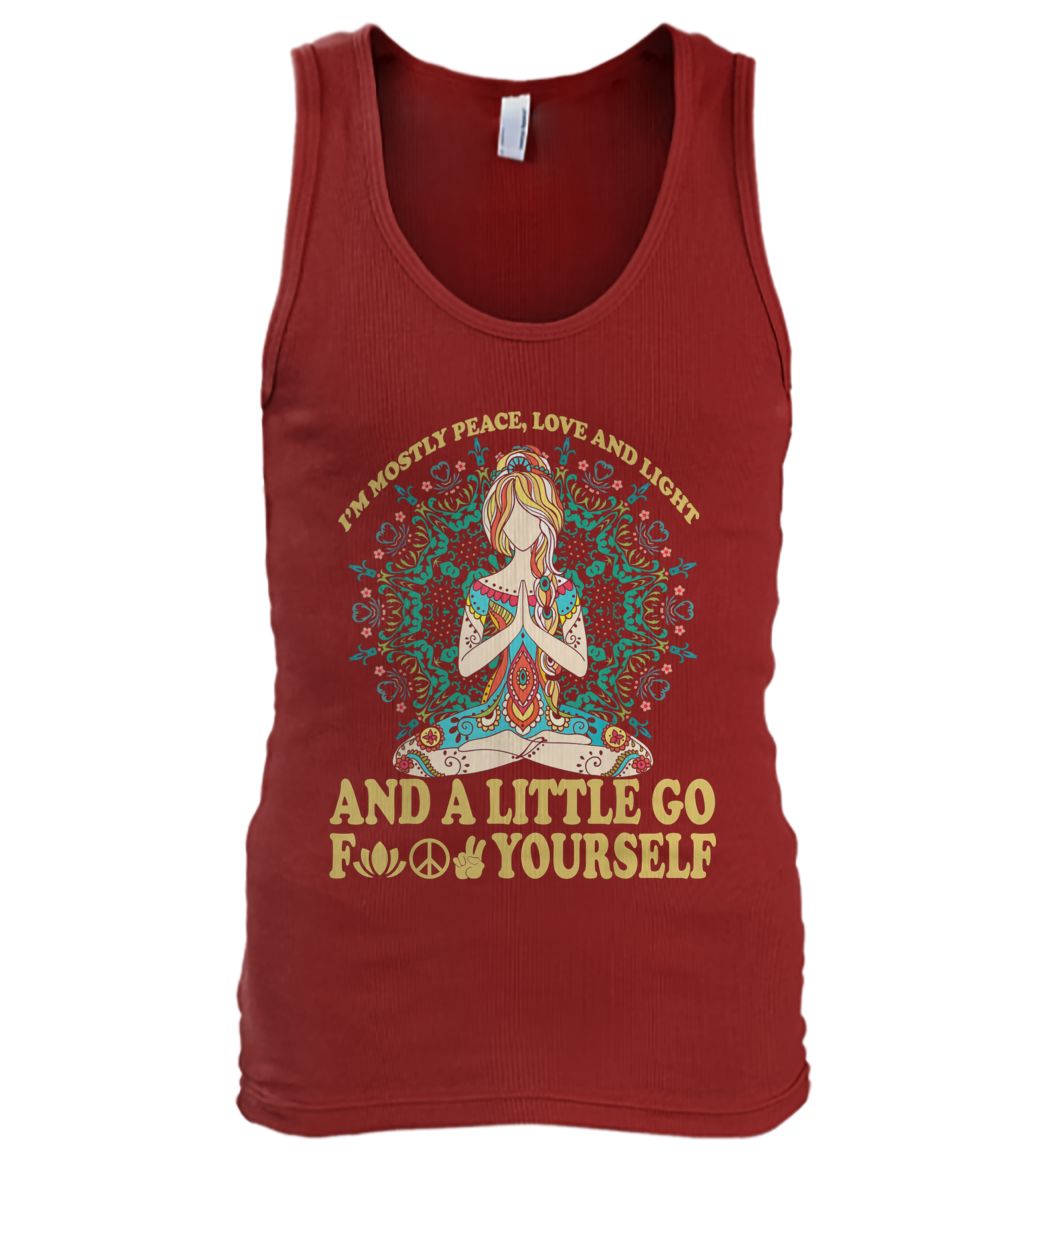 Yoga tattoo I'm mostly peace love and light men's tank top